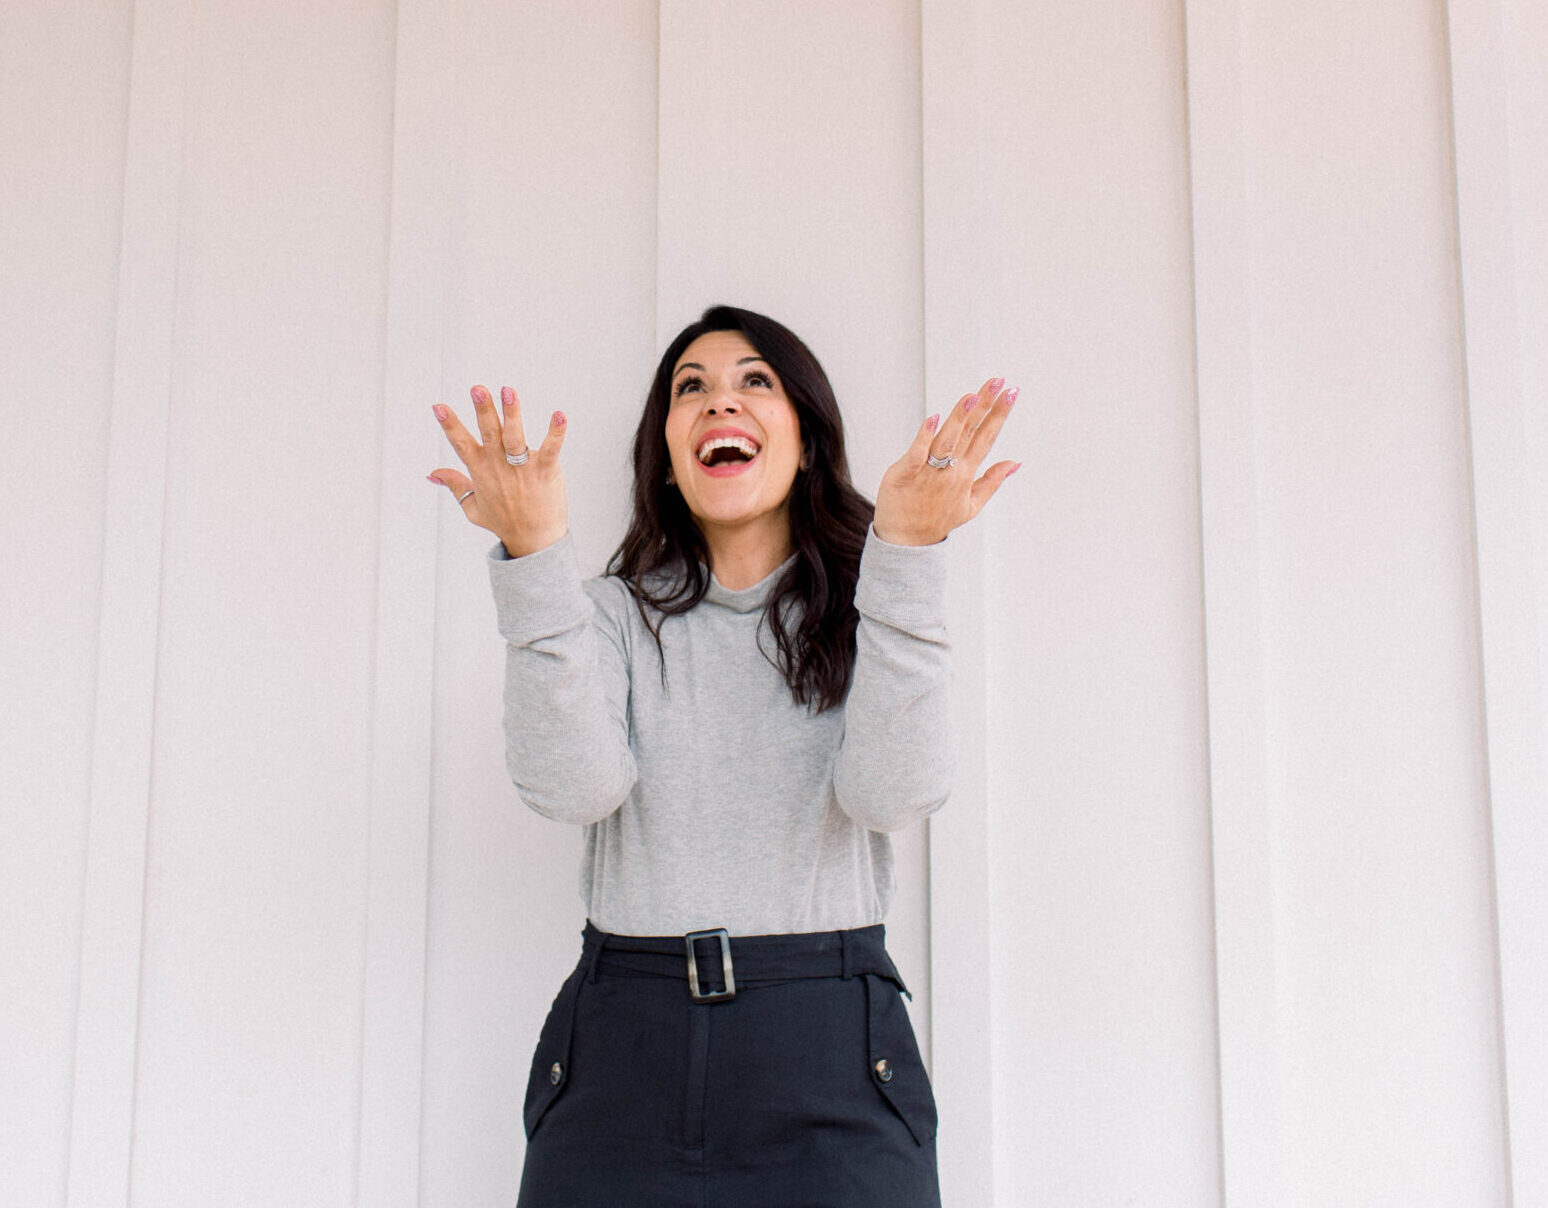 dark haired woman with her back against a white wall is wearing a grey sweater and black pants. her face is looking up and she is smiling. Her arms are bent at the elbows with her palms facing up.